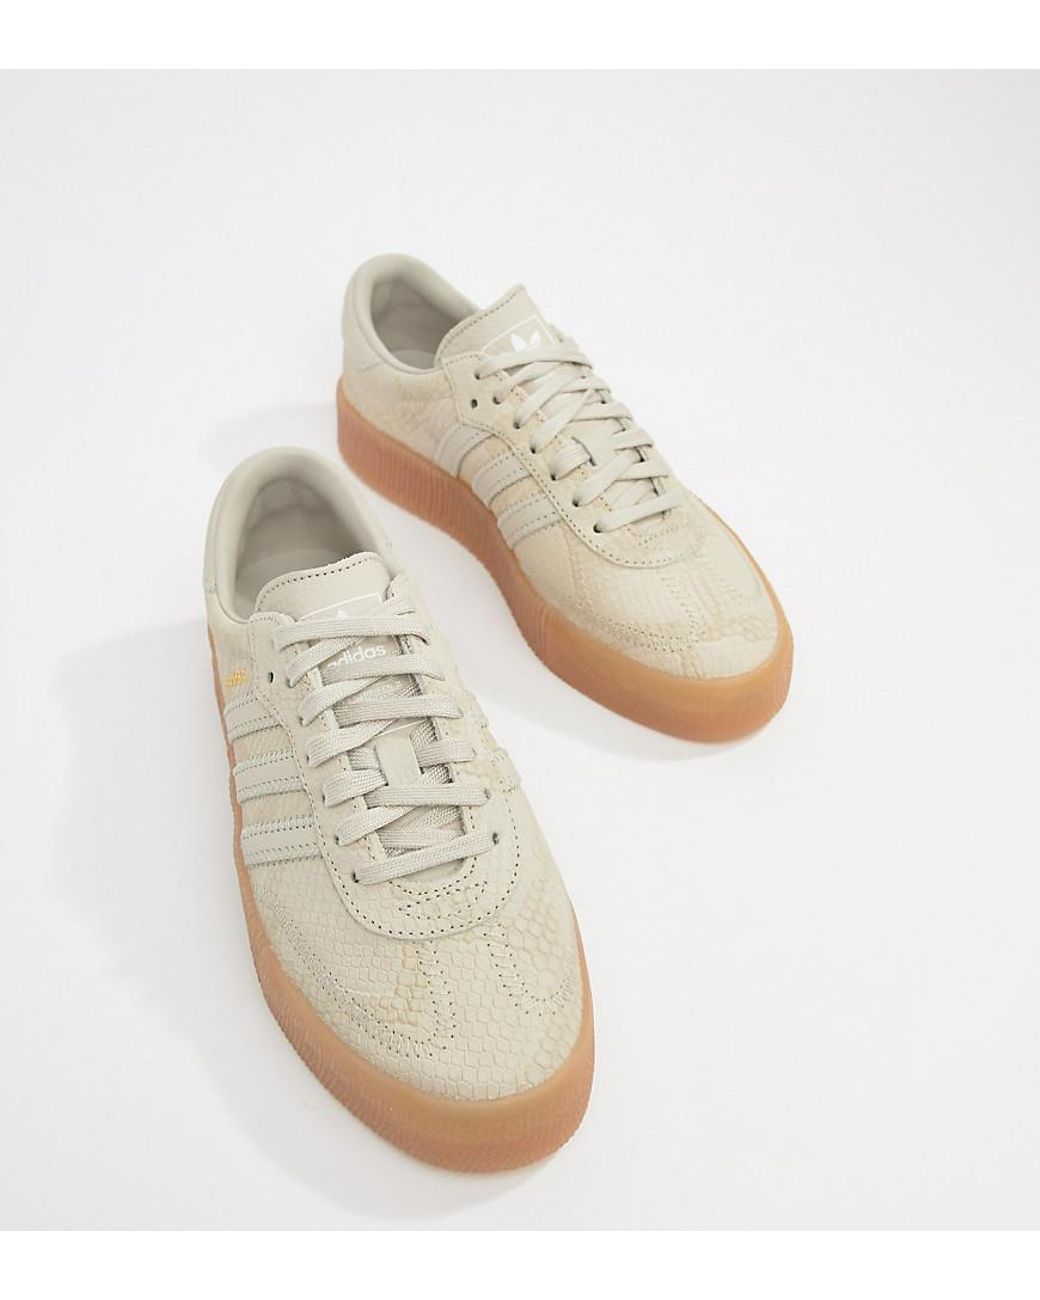 ur Forsømme Forebyggelse adidas Originals Samba Rose Sneakers In Tan With Gum Sole in Natural | Lyst